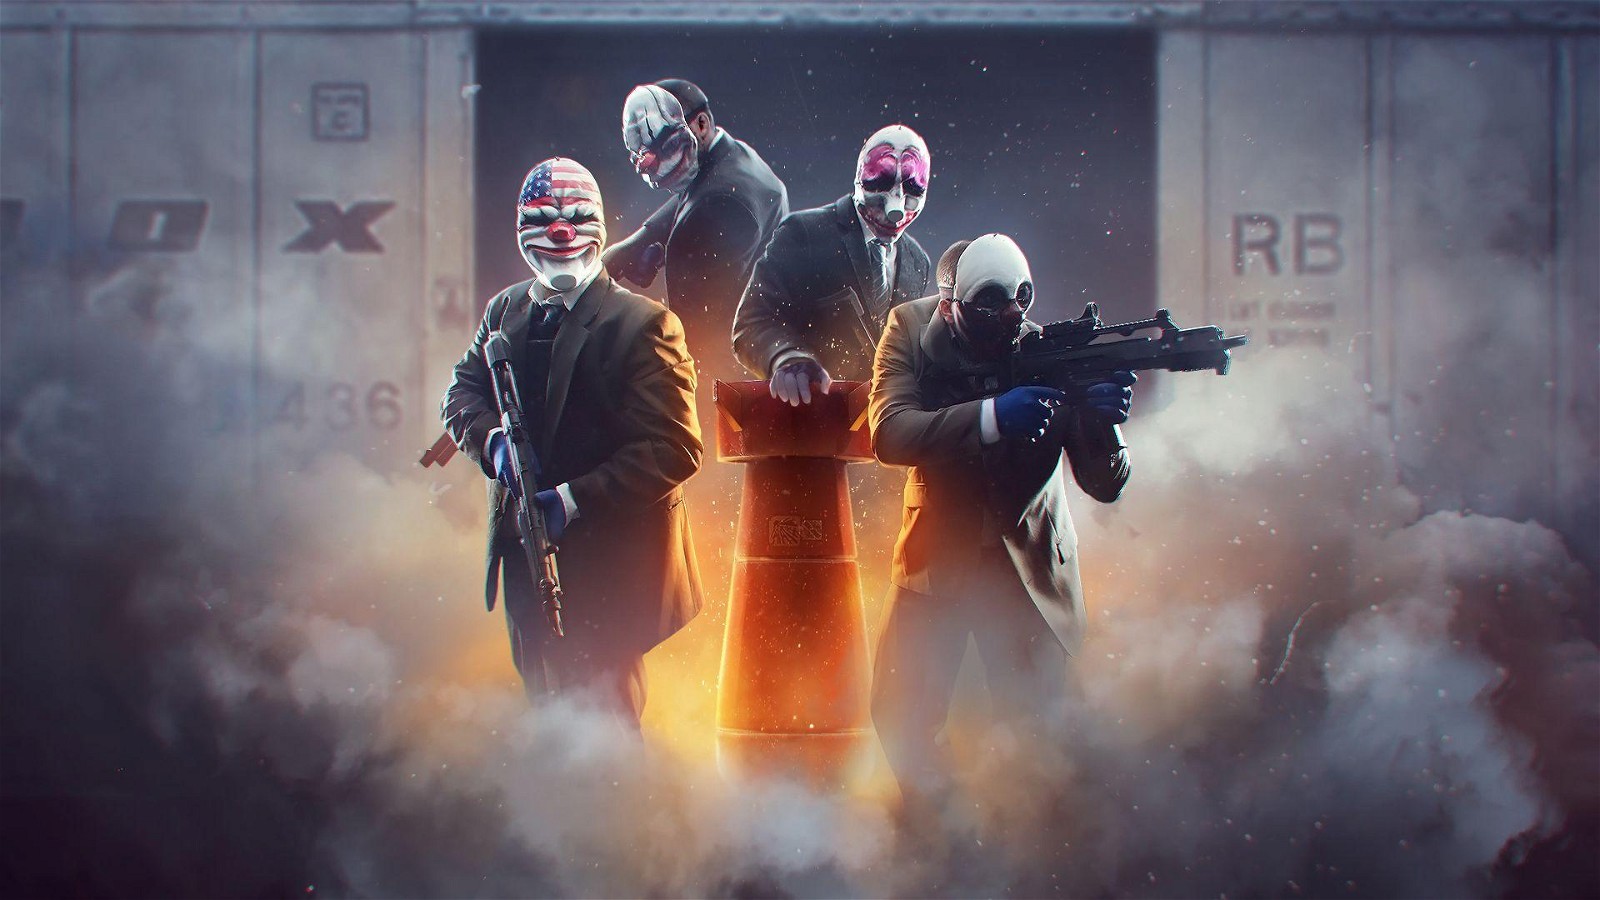 Free Video Games for August Include PAYDAY 2